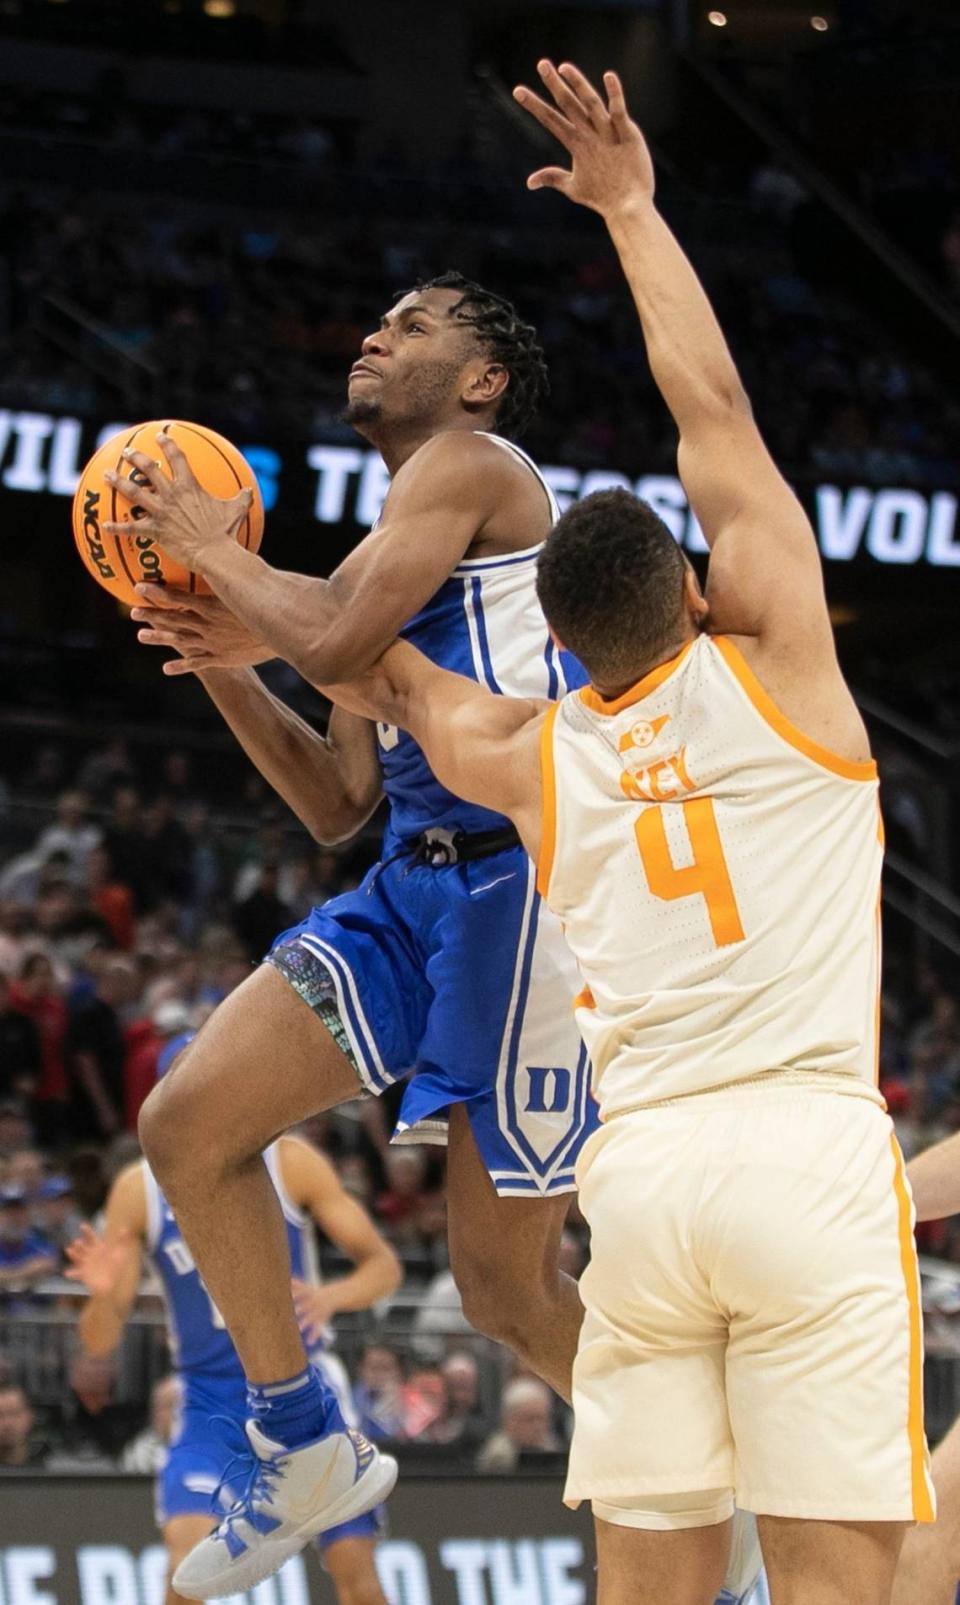 Duke’s Jeremy Roach (3) drives to the basket against Tennessee’s Tyreke Key (4) in the first half during the second round of the NCAA Tournament on Saturday, March 18, 2023 at the Amway Center in Orlando, Fla.